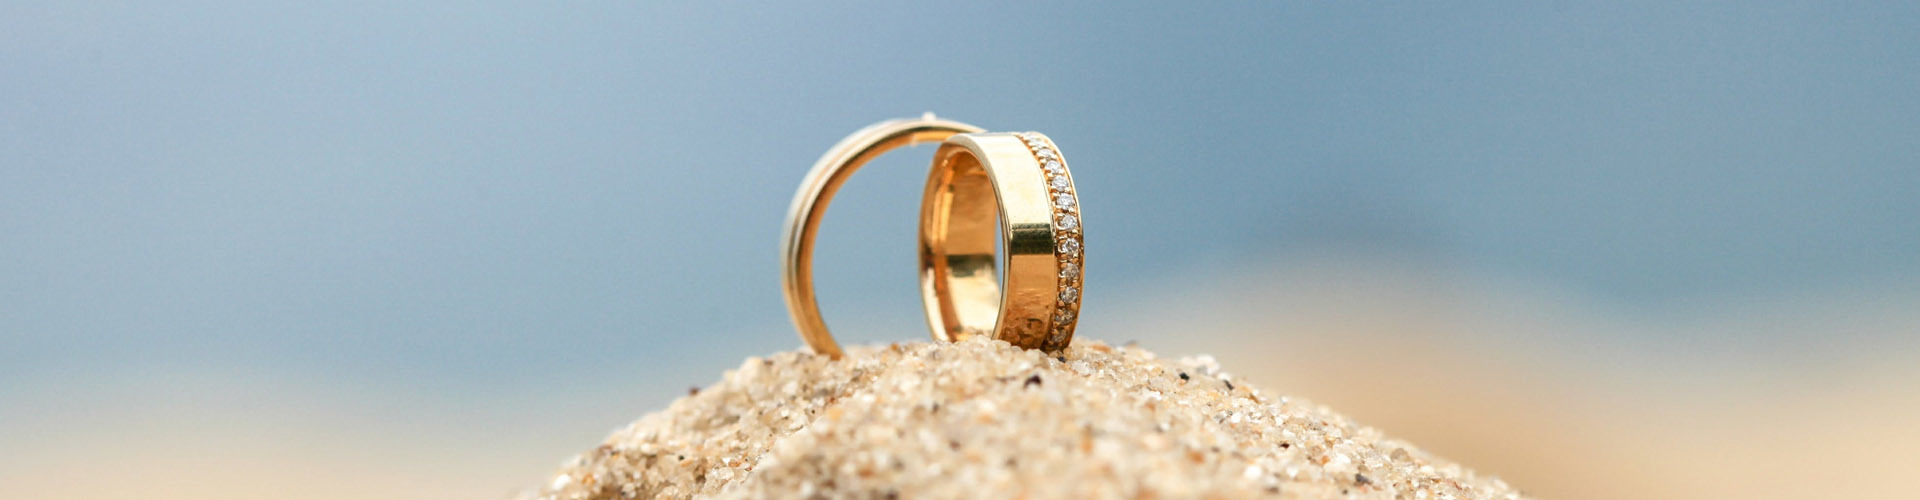 wedding rings posed on a beach